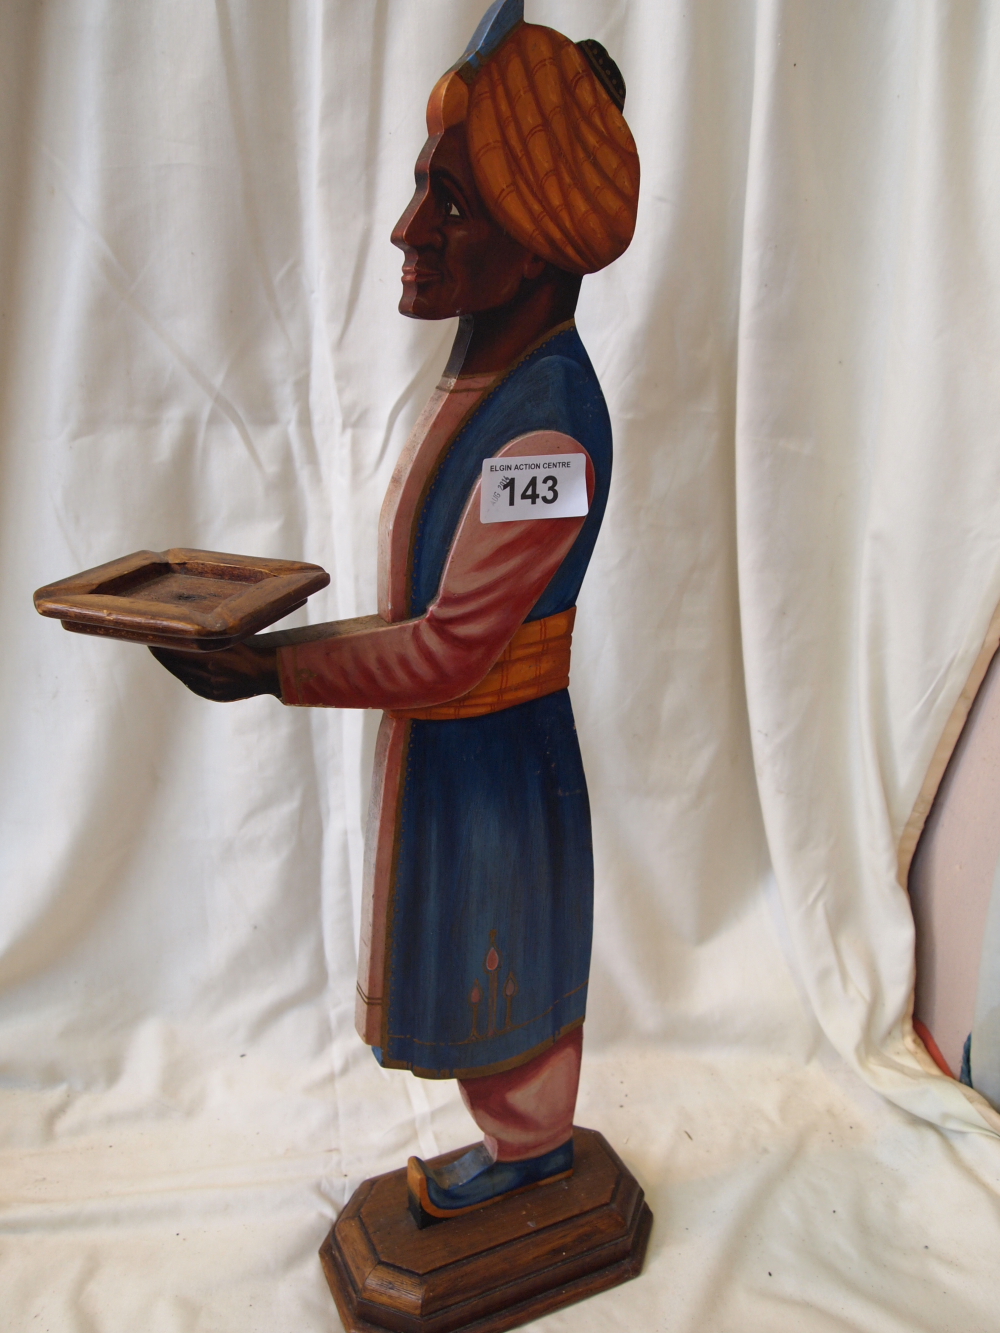 Sale Item:    CARVED INDIAN FIGURE   Vat Status:   No Vat   Buyers Premium:  This lot is subject to